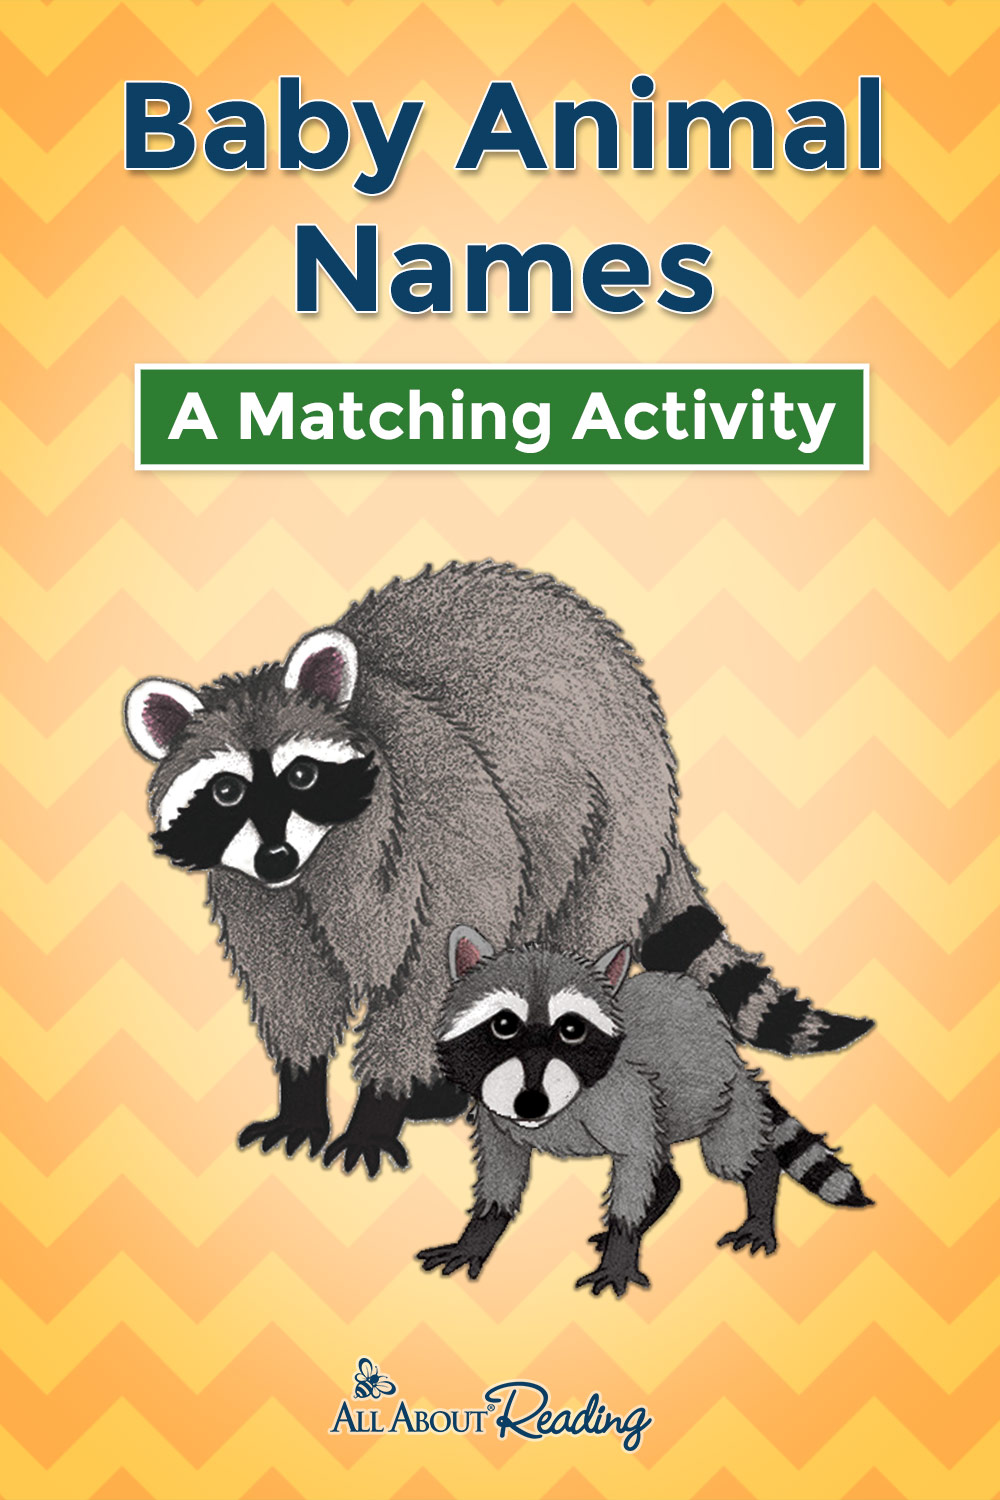 Baby Animal Names (FREE Downloadable Matching Activity)